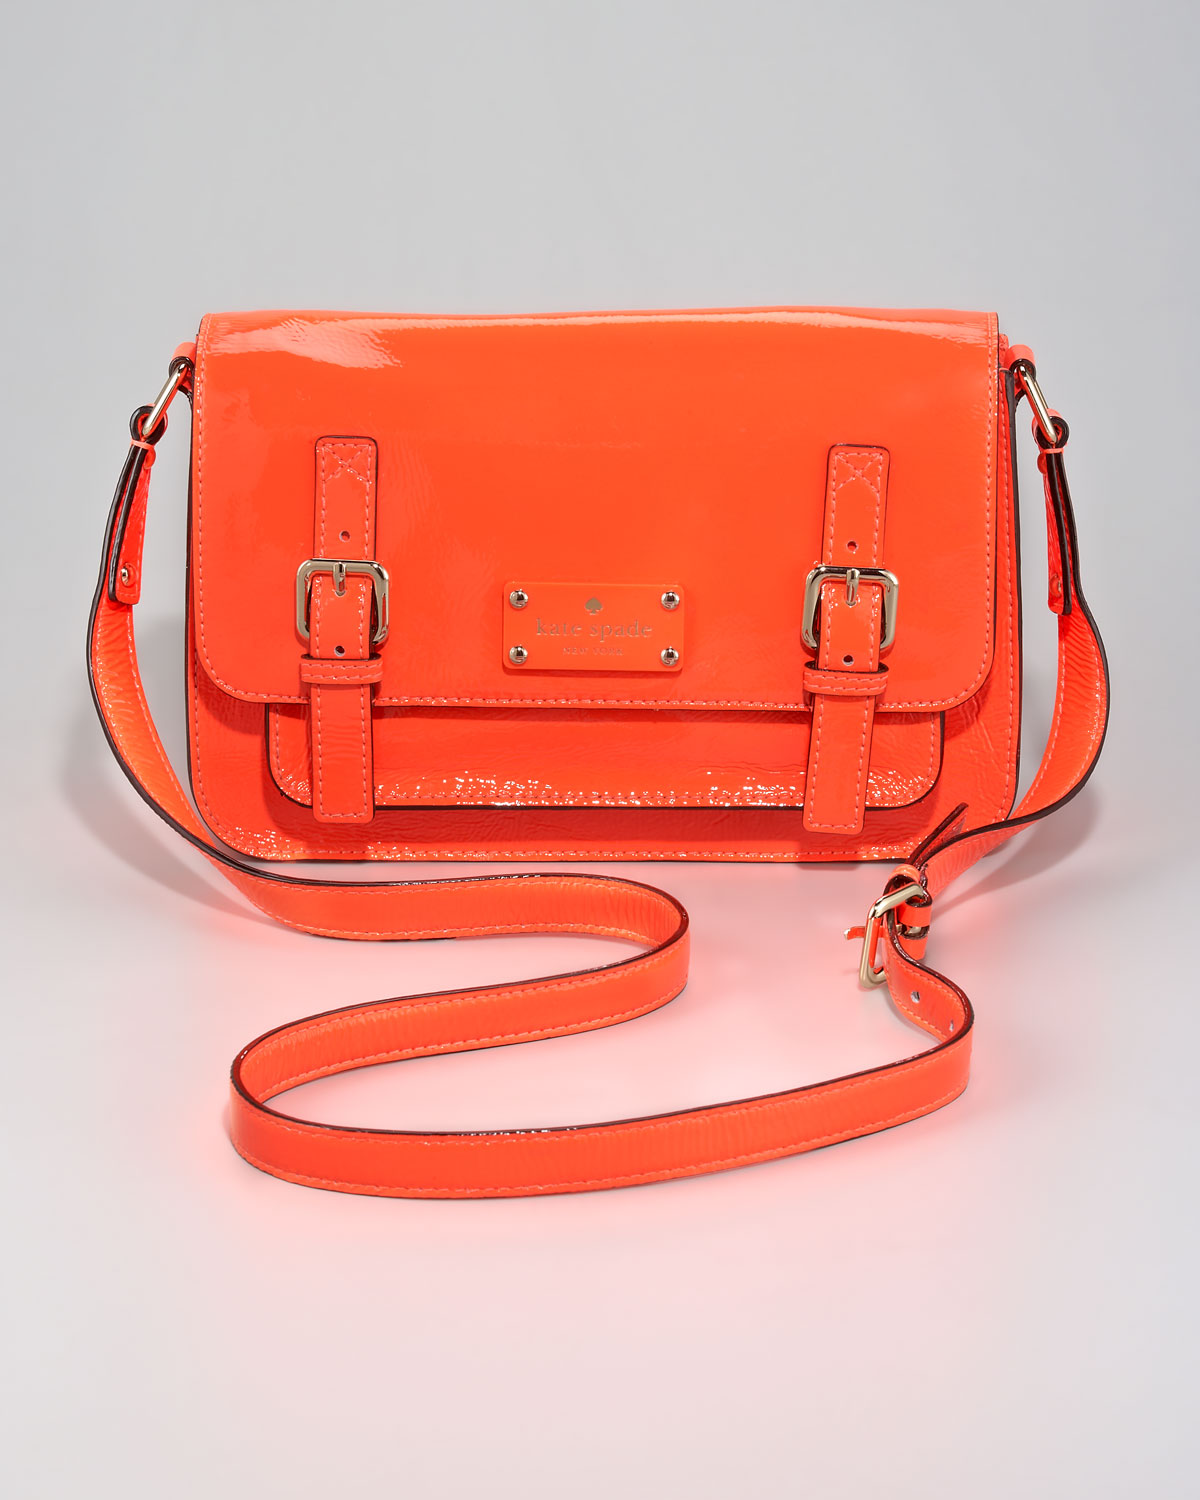 Kate spade new york Patent Leather Scout Crossbody Bag in Orange | Lyst